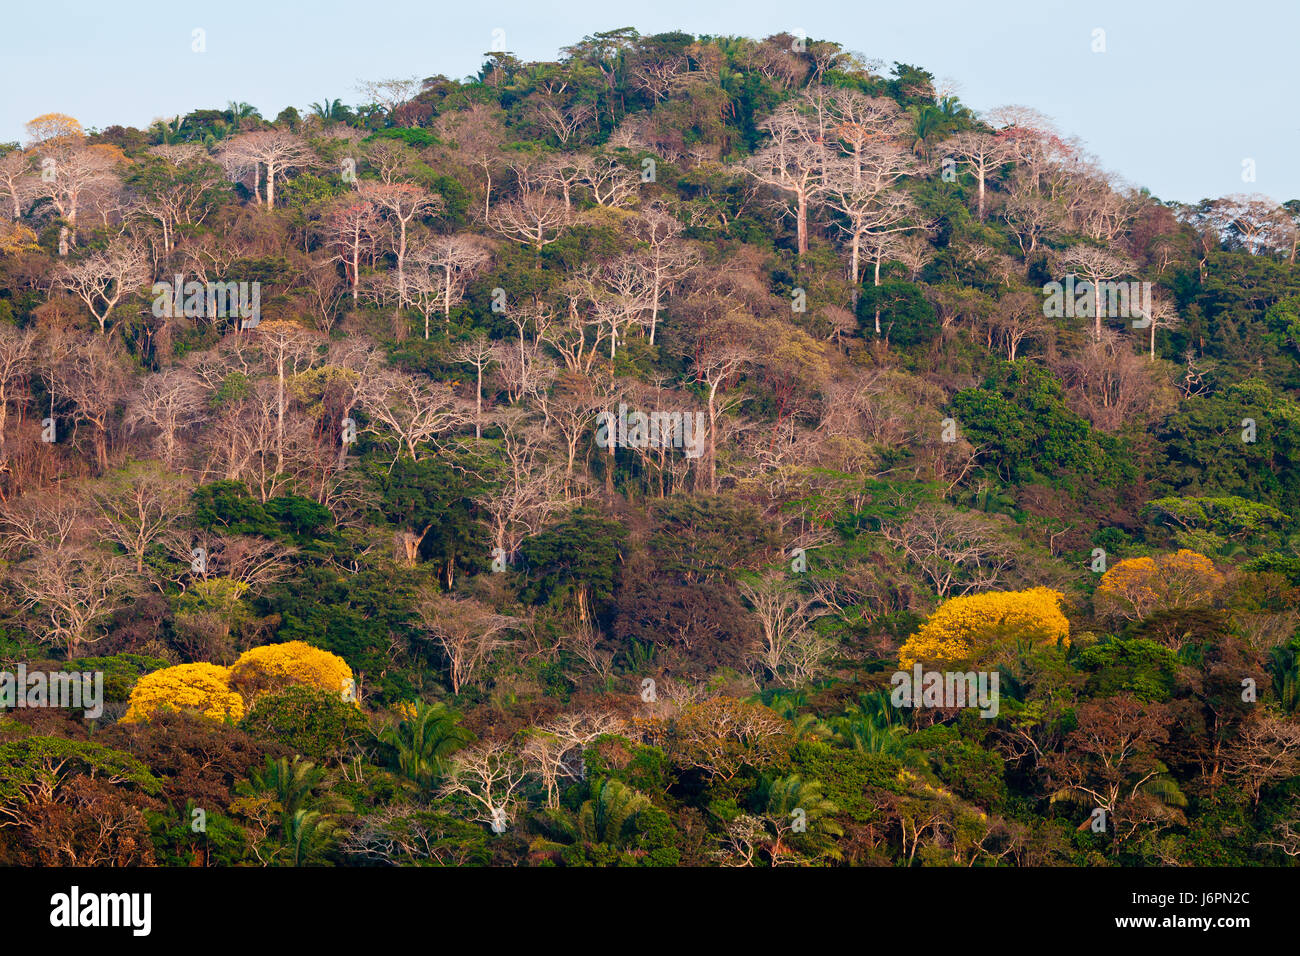 Rainforest beside Rio Chagres in Soberania National Park, Republic of Panama. The yellow trees are flowering Gold Trees (Guayacanes). Stock Photo